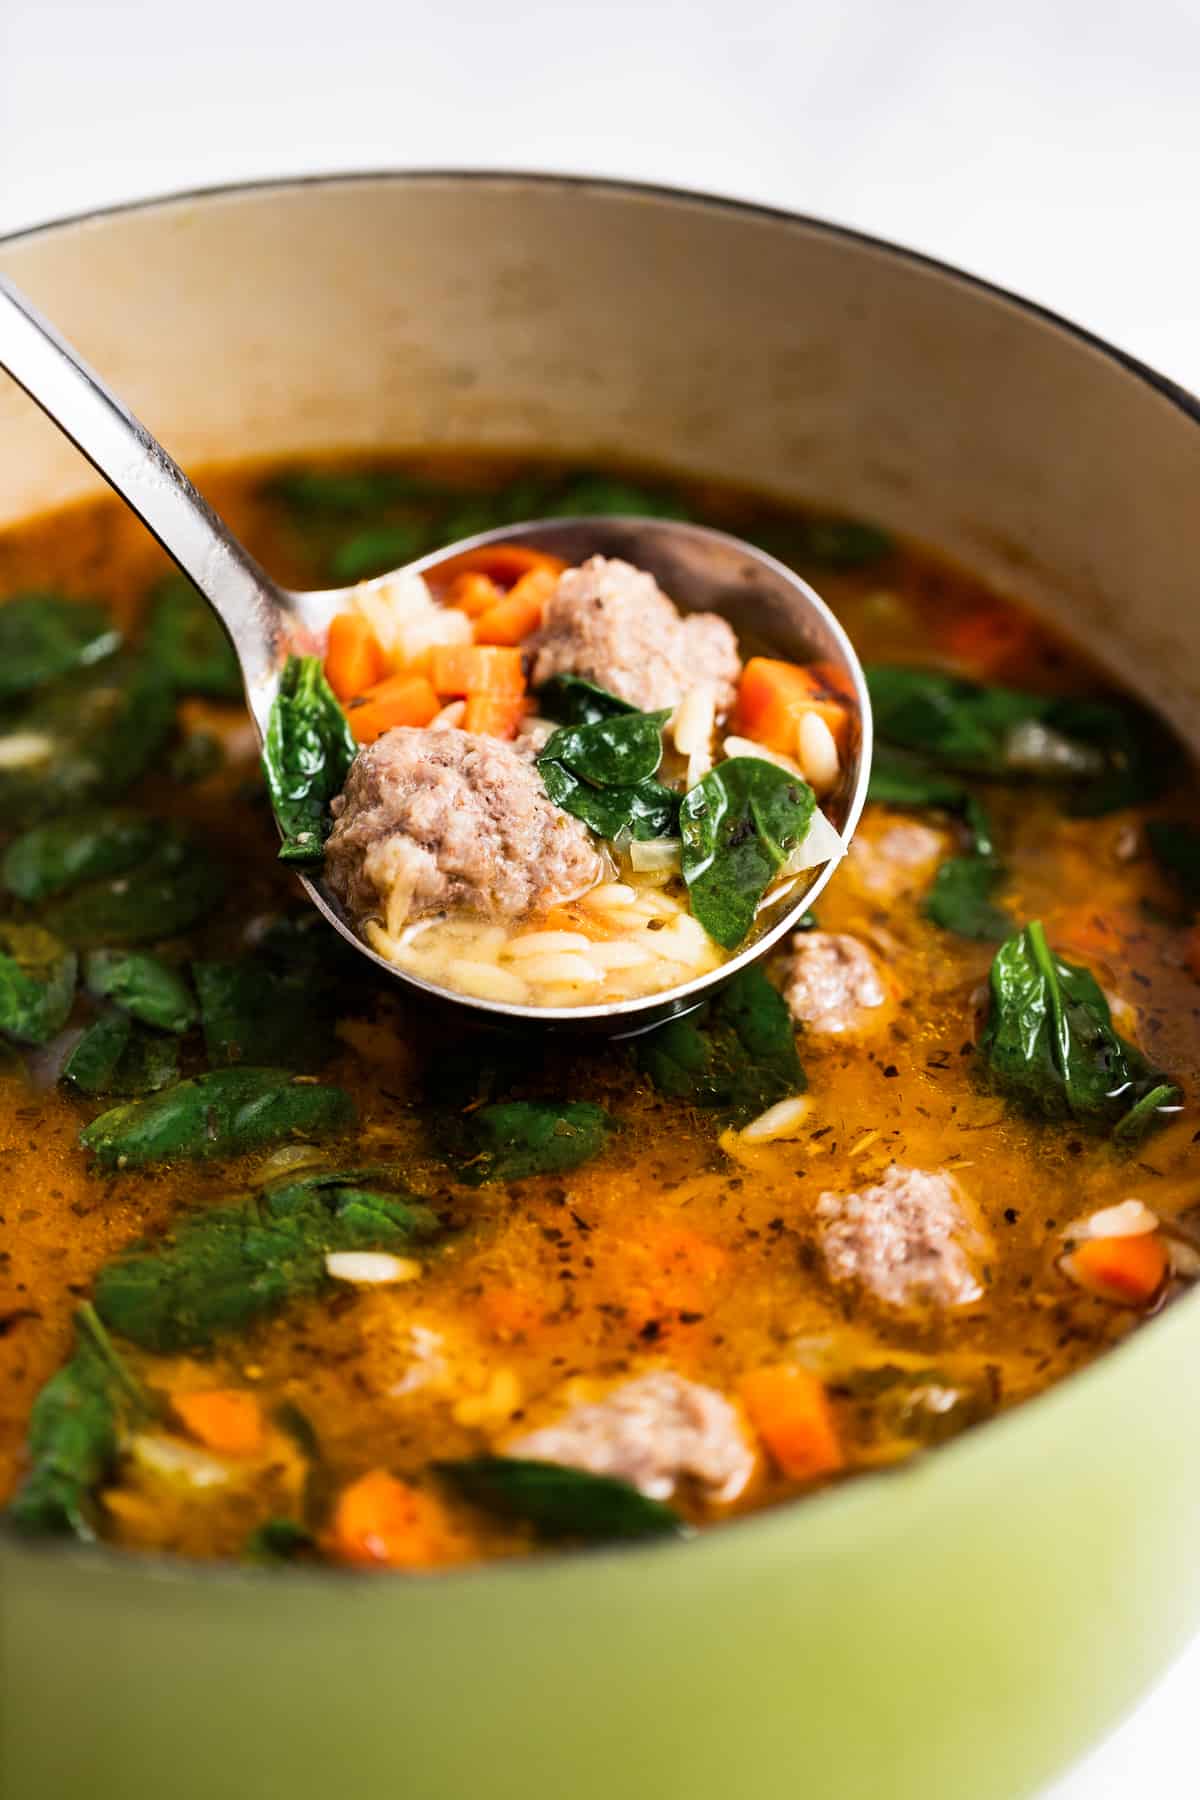 Cooked Italian wedding soup in the pot.